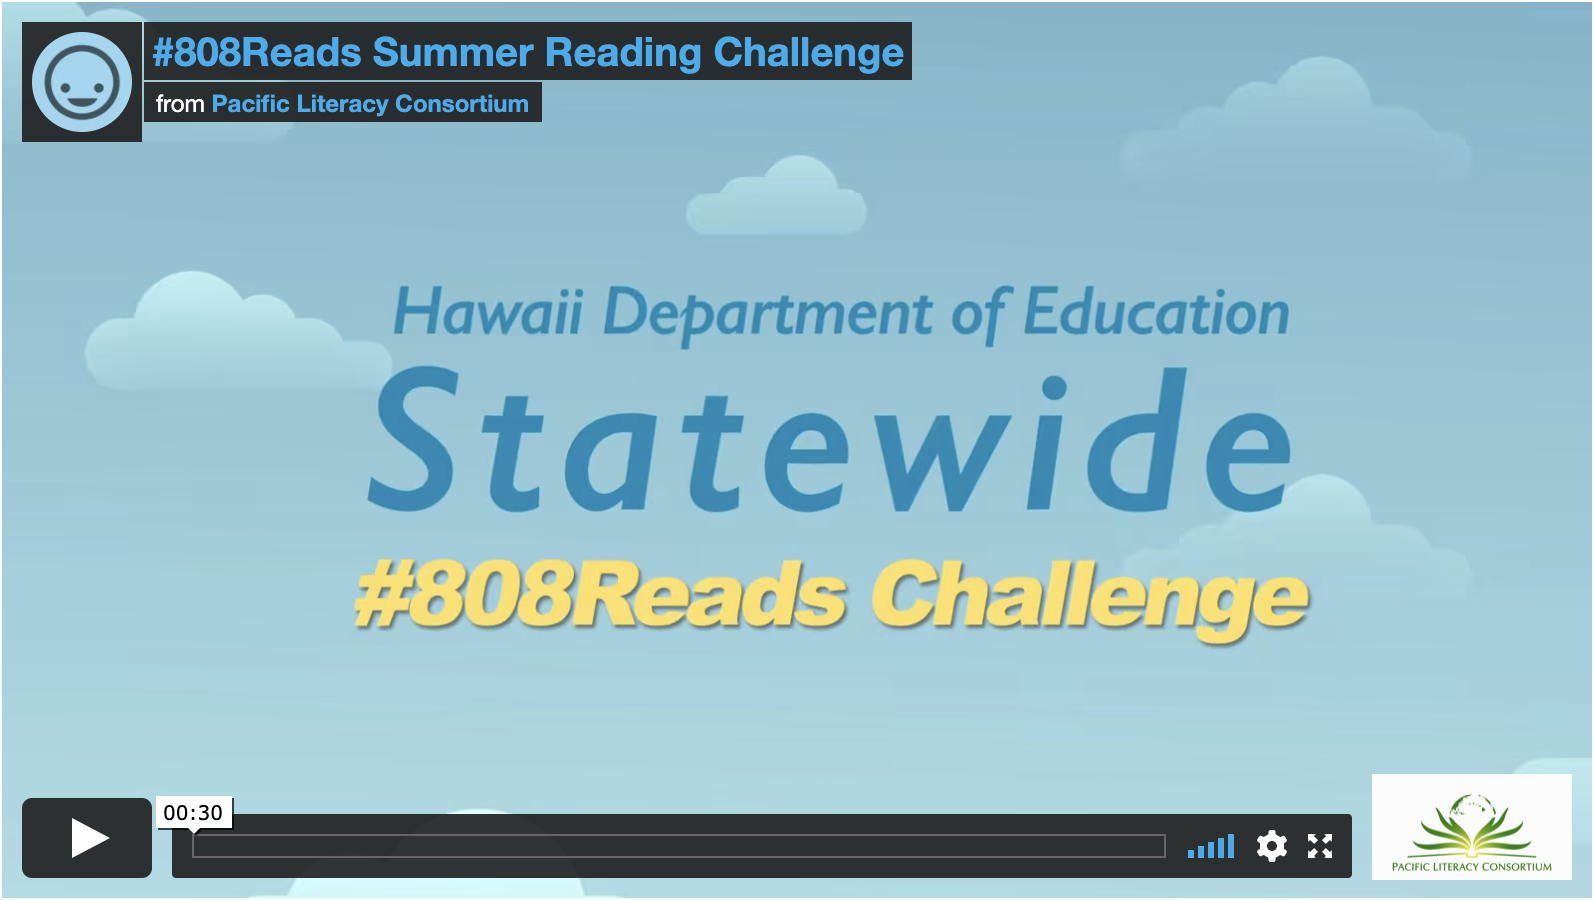 June 1, 2020 | PLC Teams with HIDOE to Launch the #808Reads Summer 2020 Reading Challenge